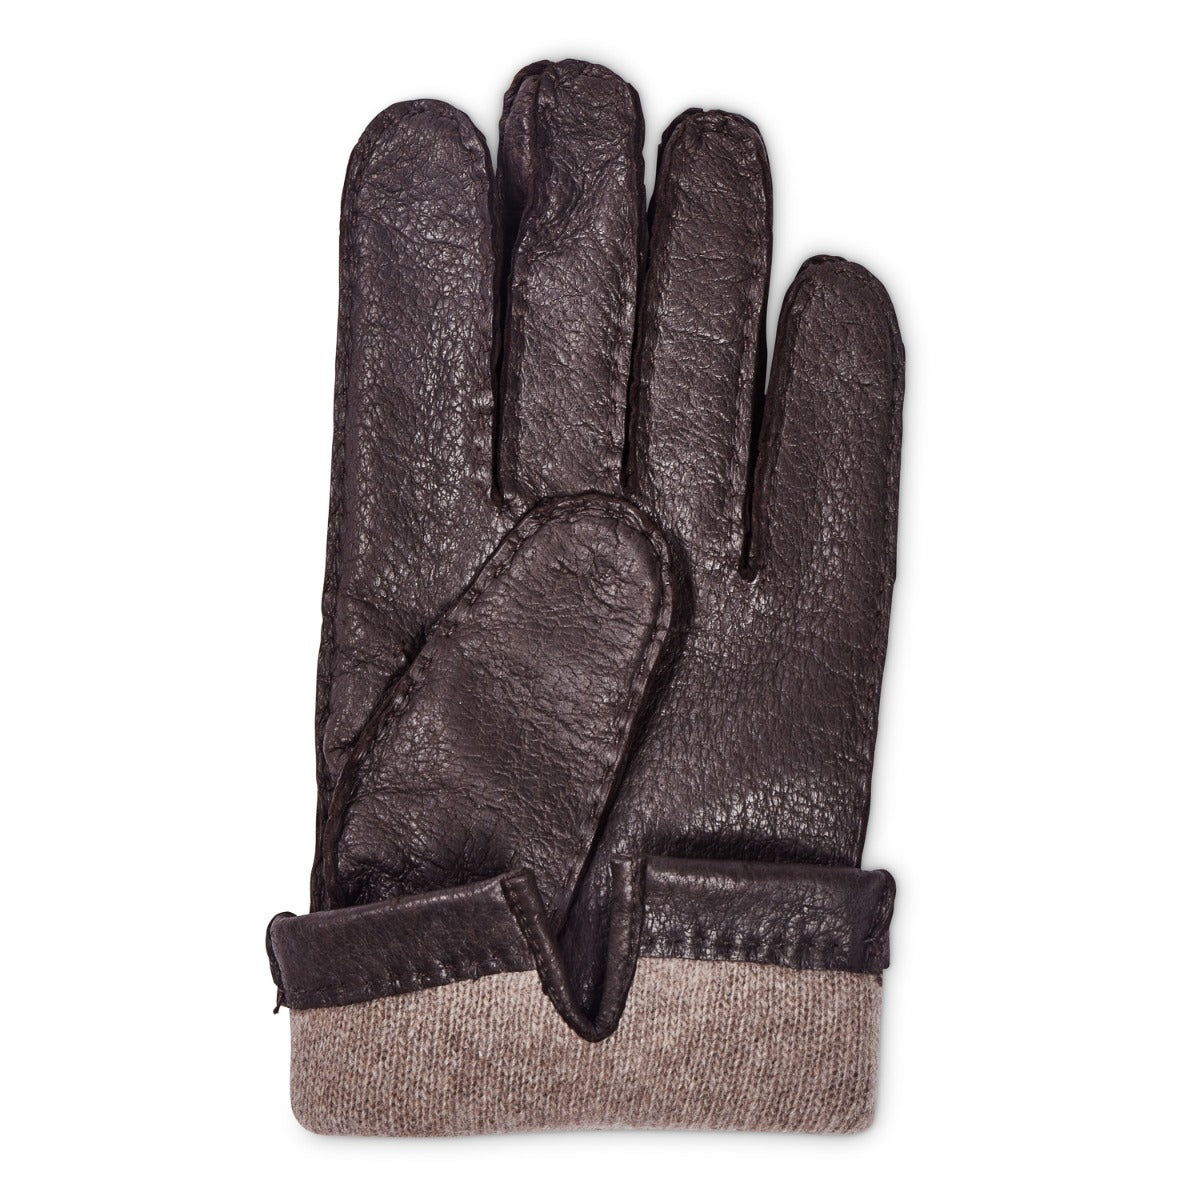 A pair of Sovereign Grade Dark Brown Peccary Leather Gloves, Cashmere Lined by KirbyAllison.com hand-sewn on a white background.